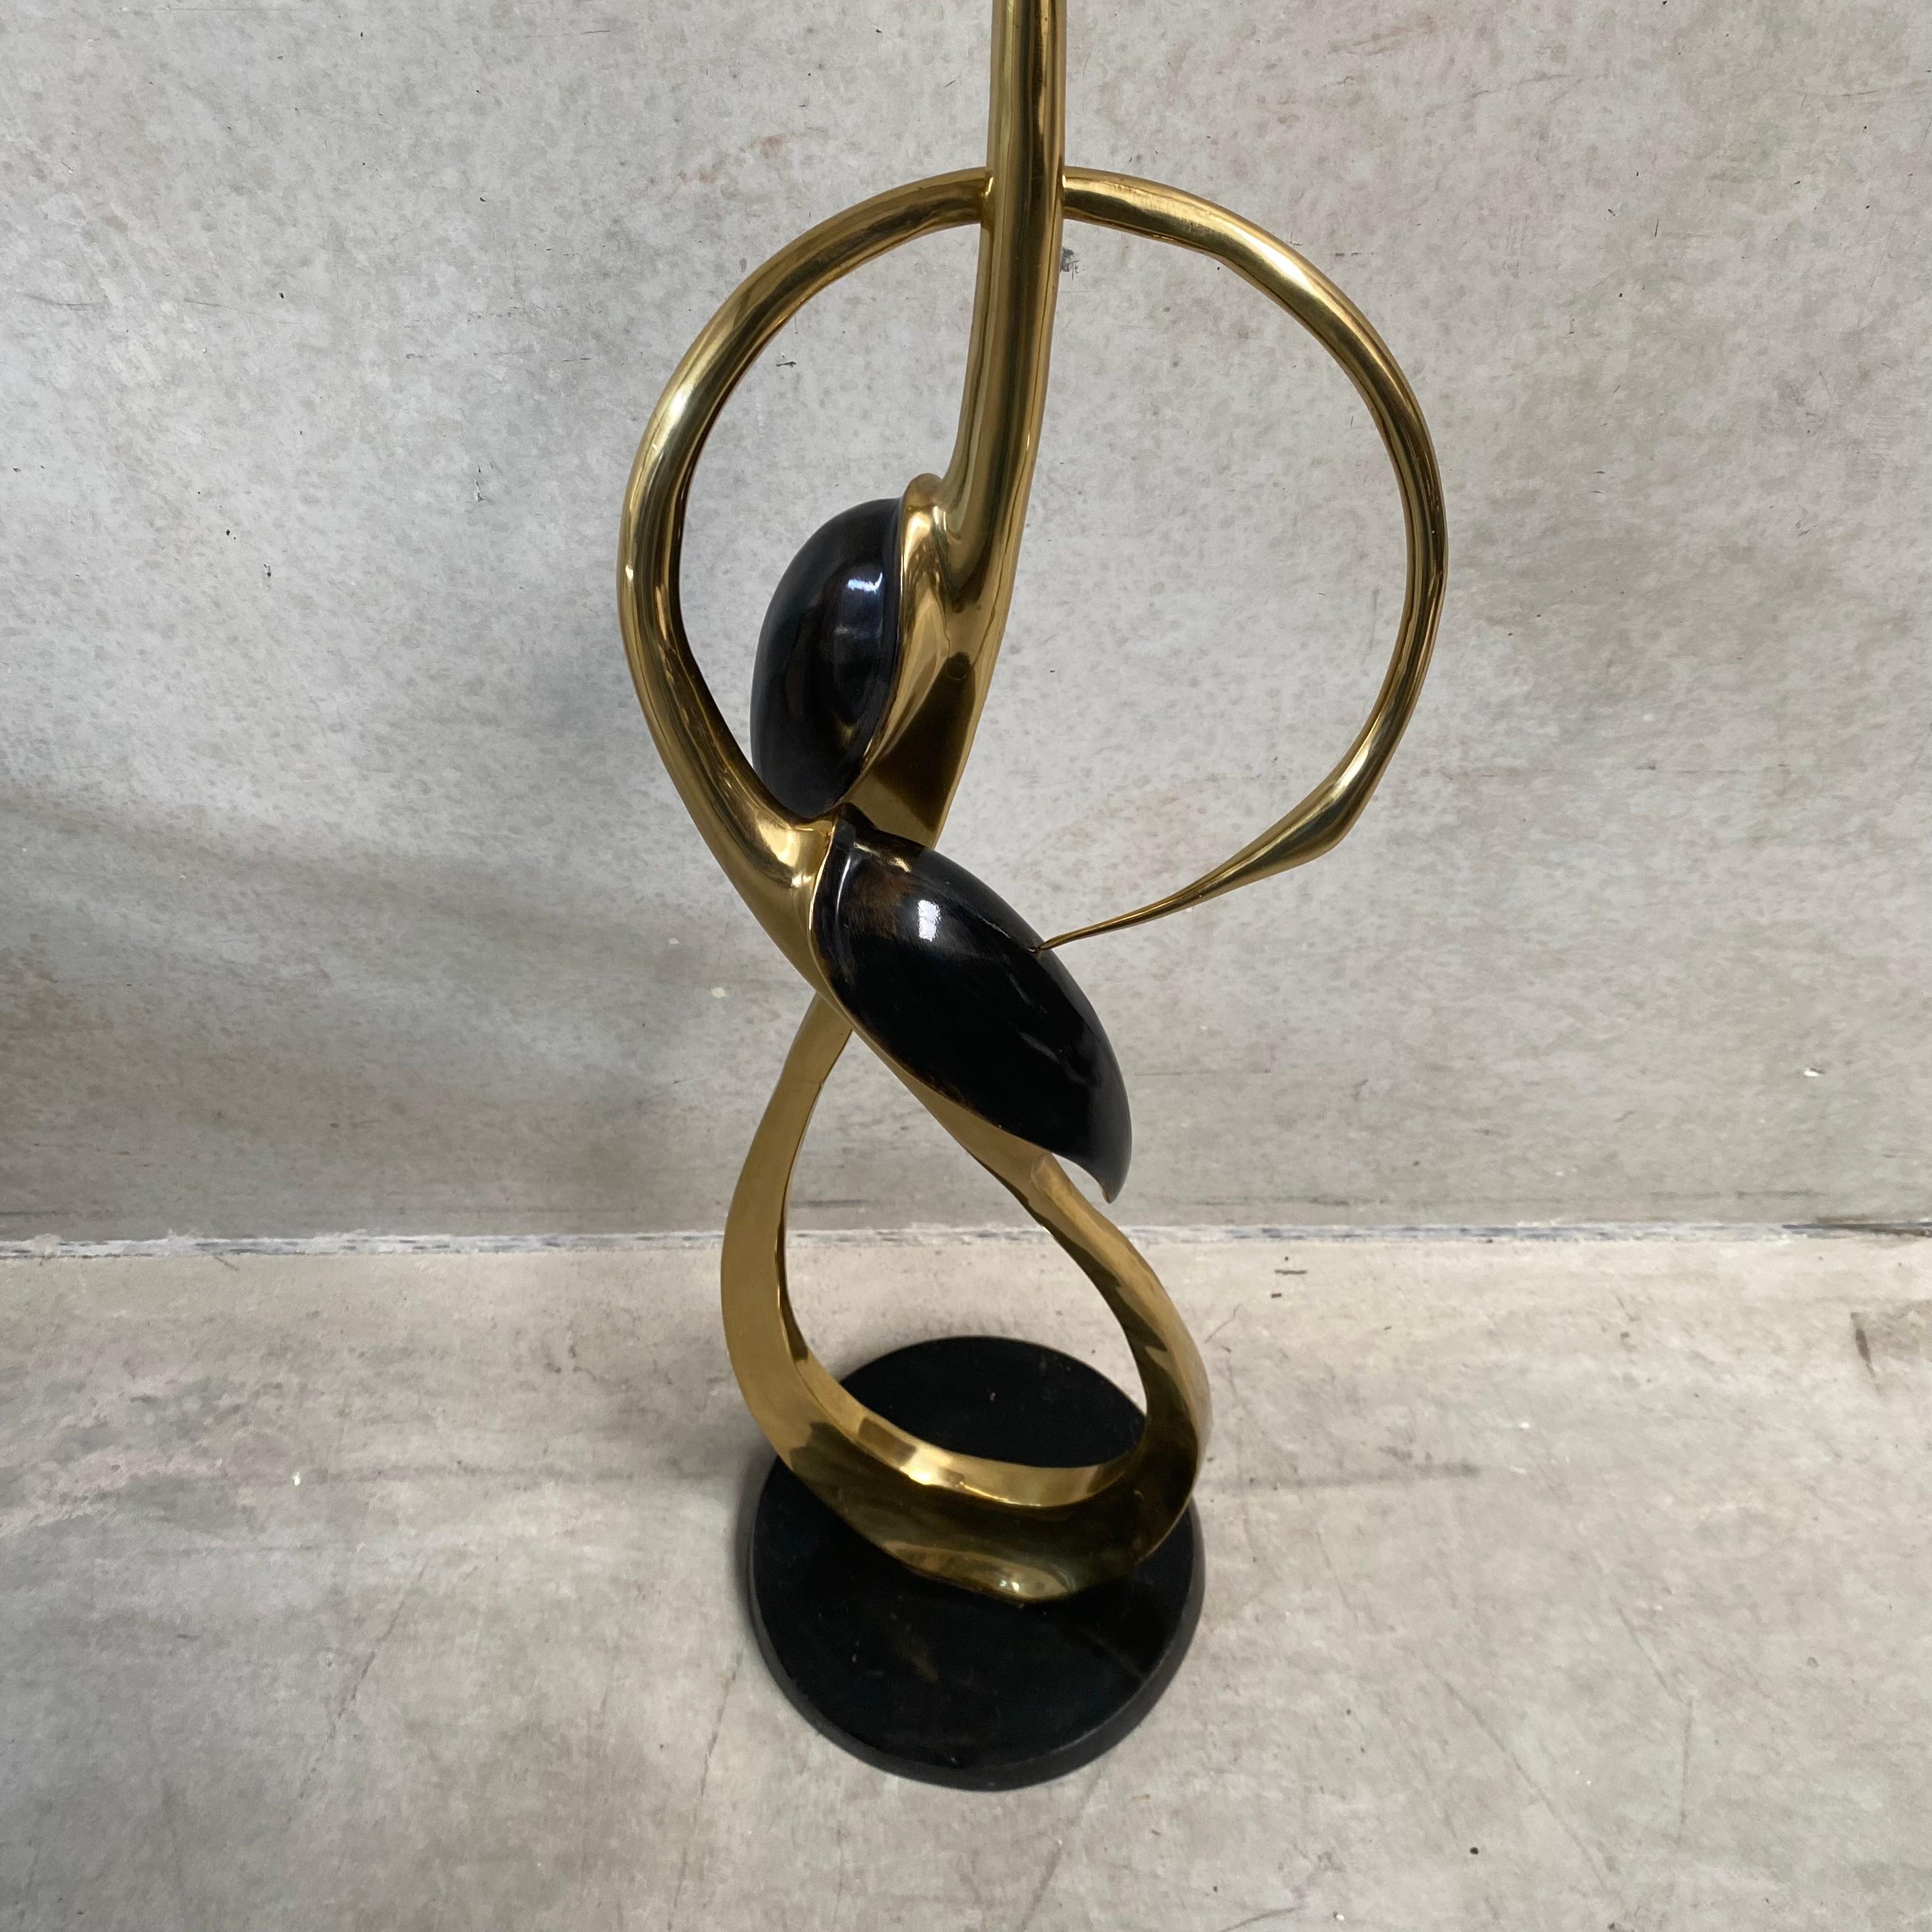 Tall Brass Entwined Cranes Sculpture by Boris Lovet Lorski For Sale 9